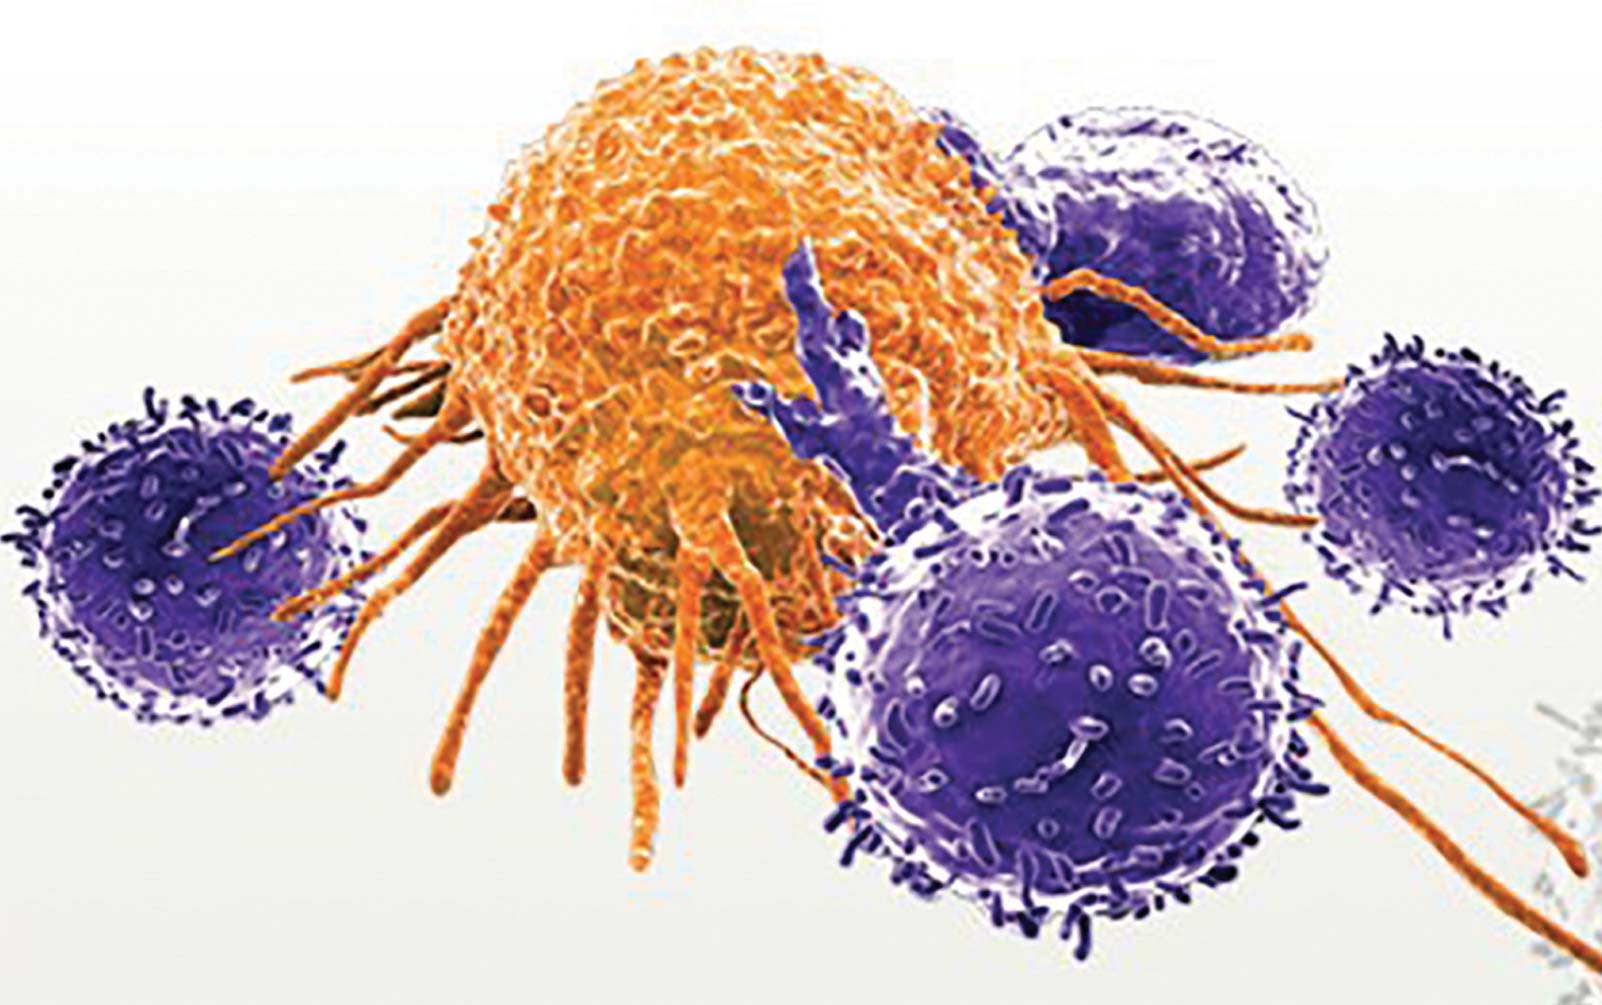 CAR-T Cells for Lung Cancer: Q&A with Dr. Charu Aggarwal